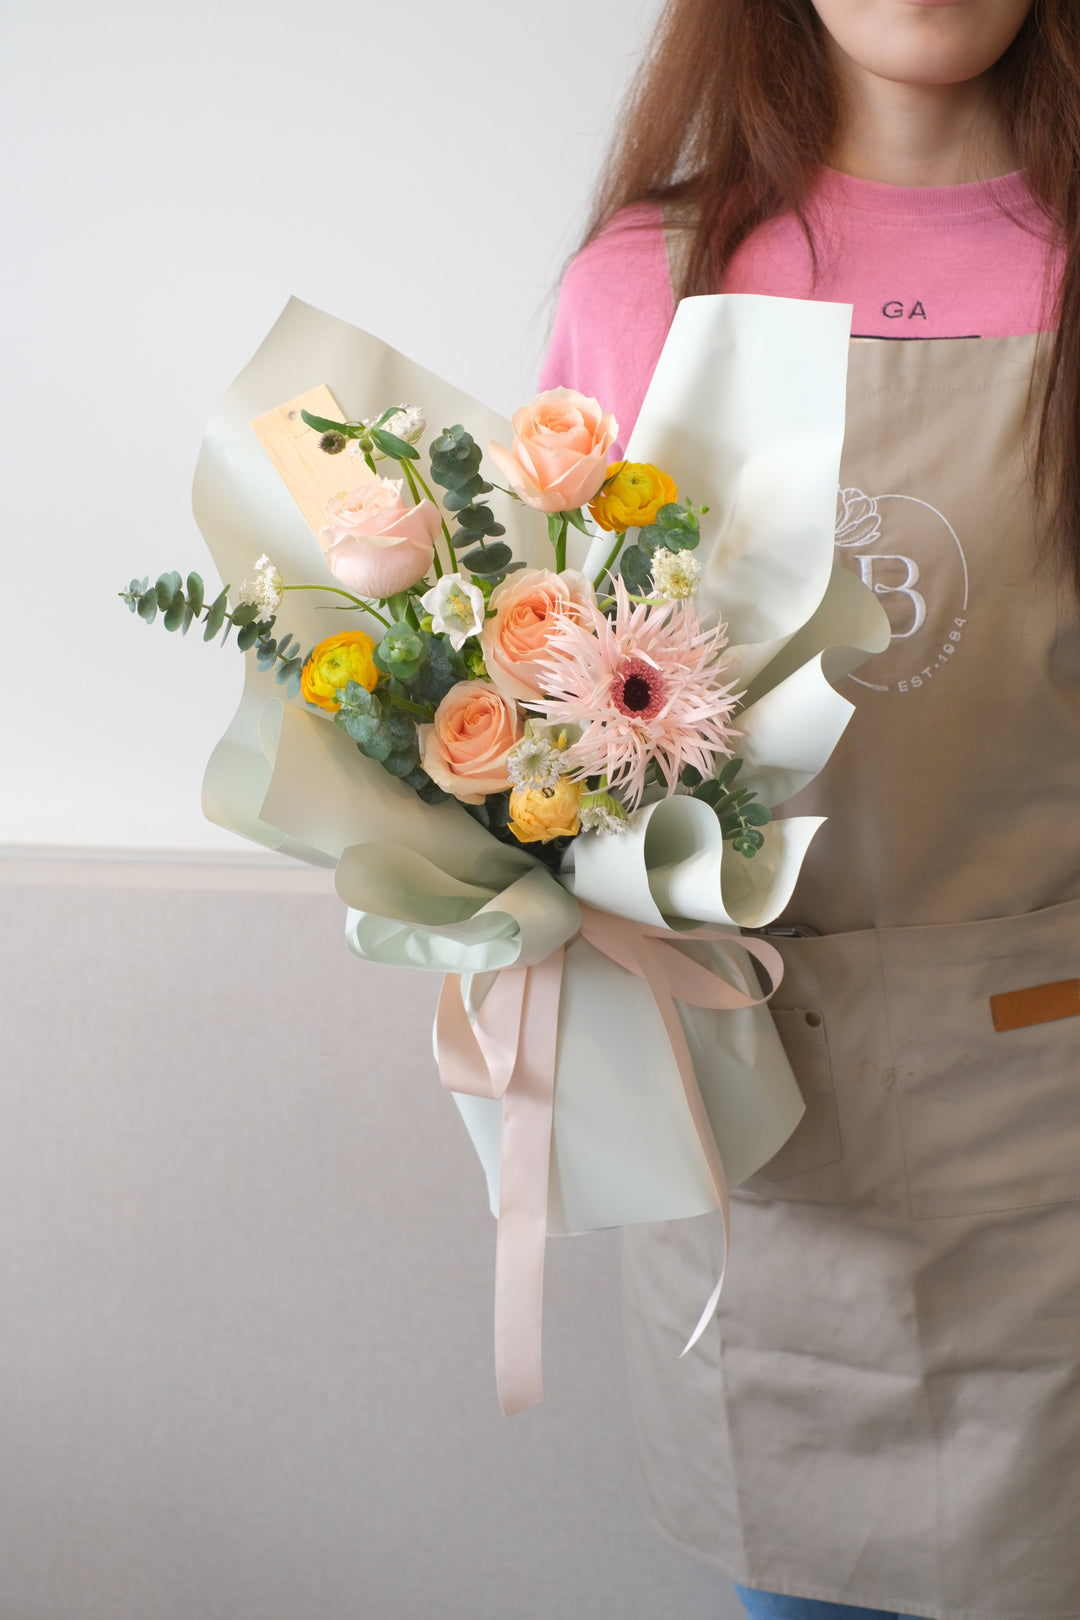  stunning bouquet of fresh ranunculus, gerberas, daisies, and more, evoking the vibrancy of morning dew. Promoting same-day delivery in Penang and Butterworth